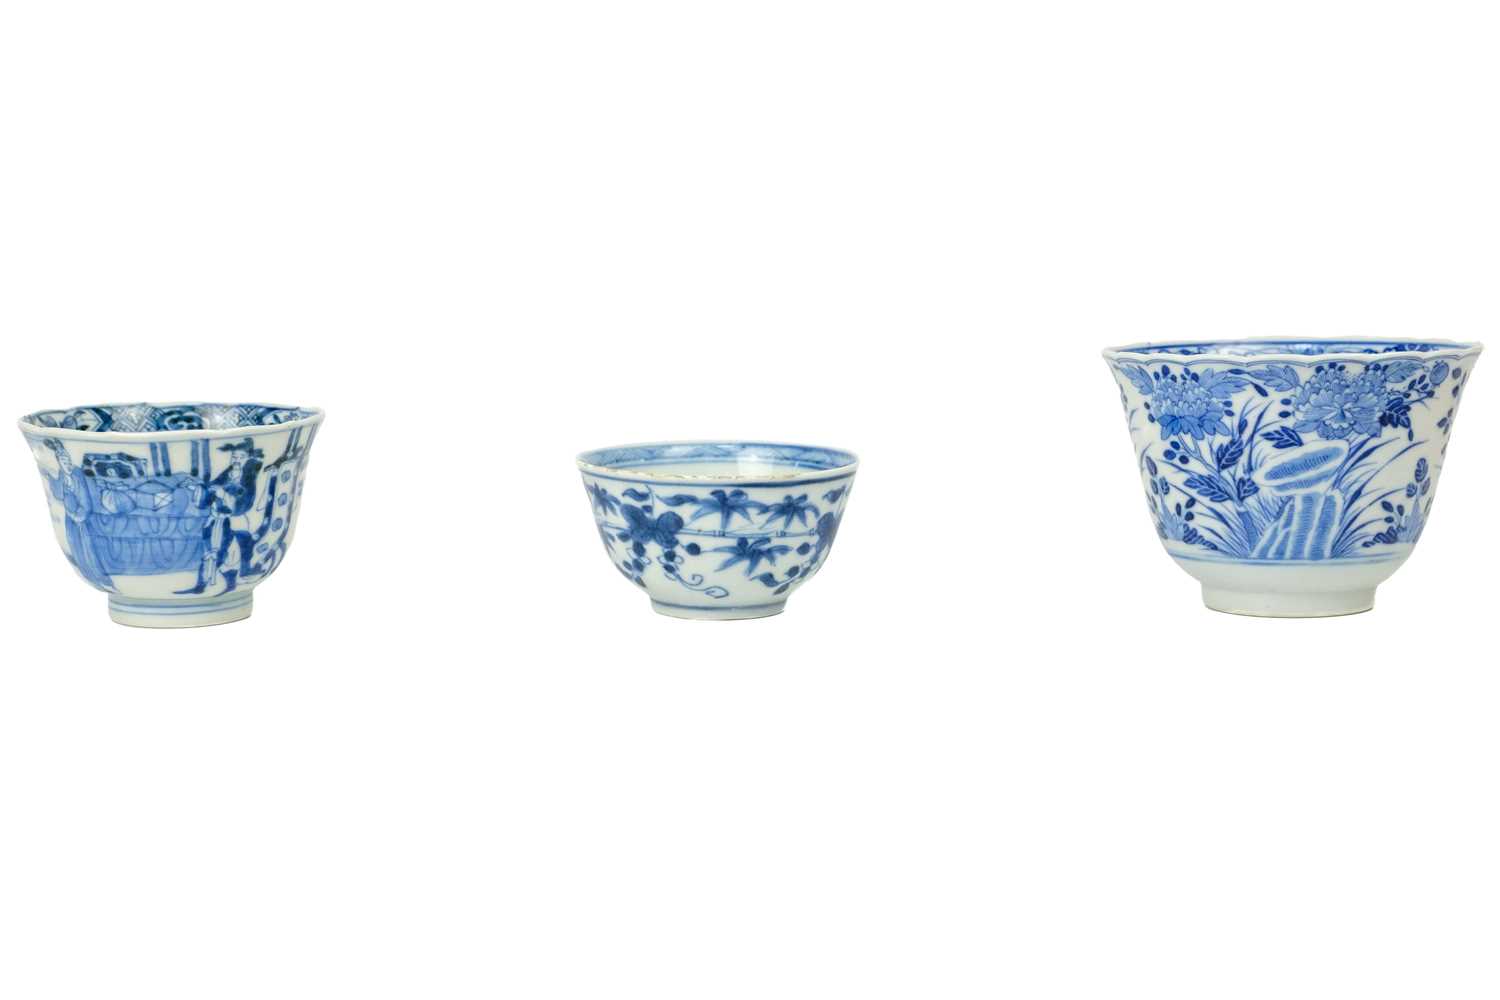 Six Chinese blue and white porcelain dishes, 18th/19th century. - Image 2 of 9